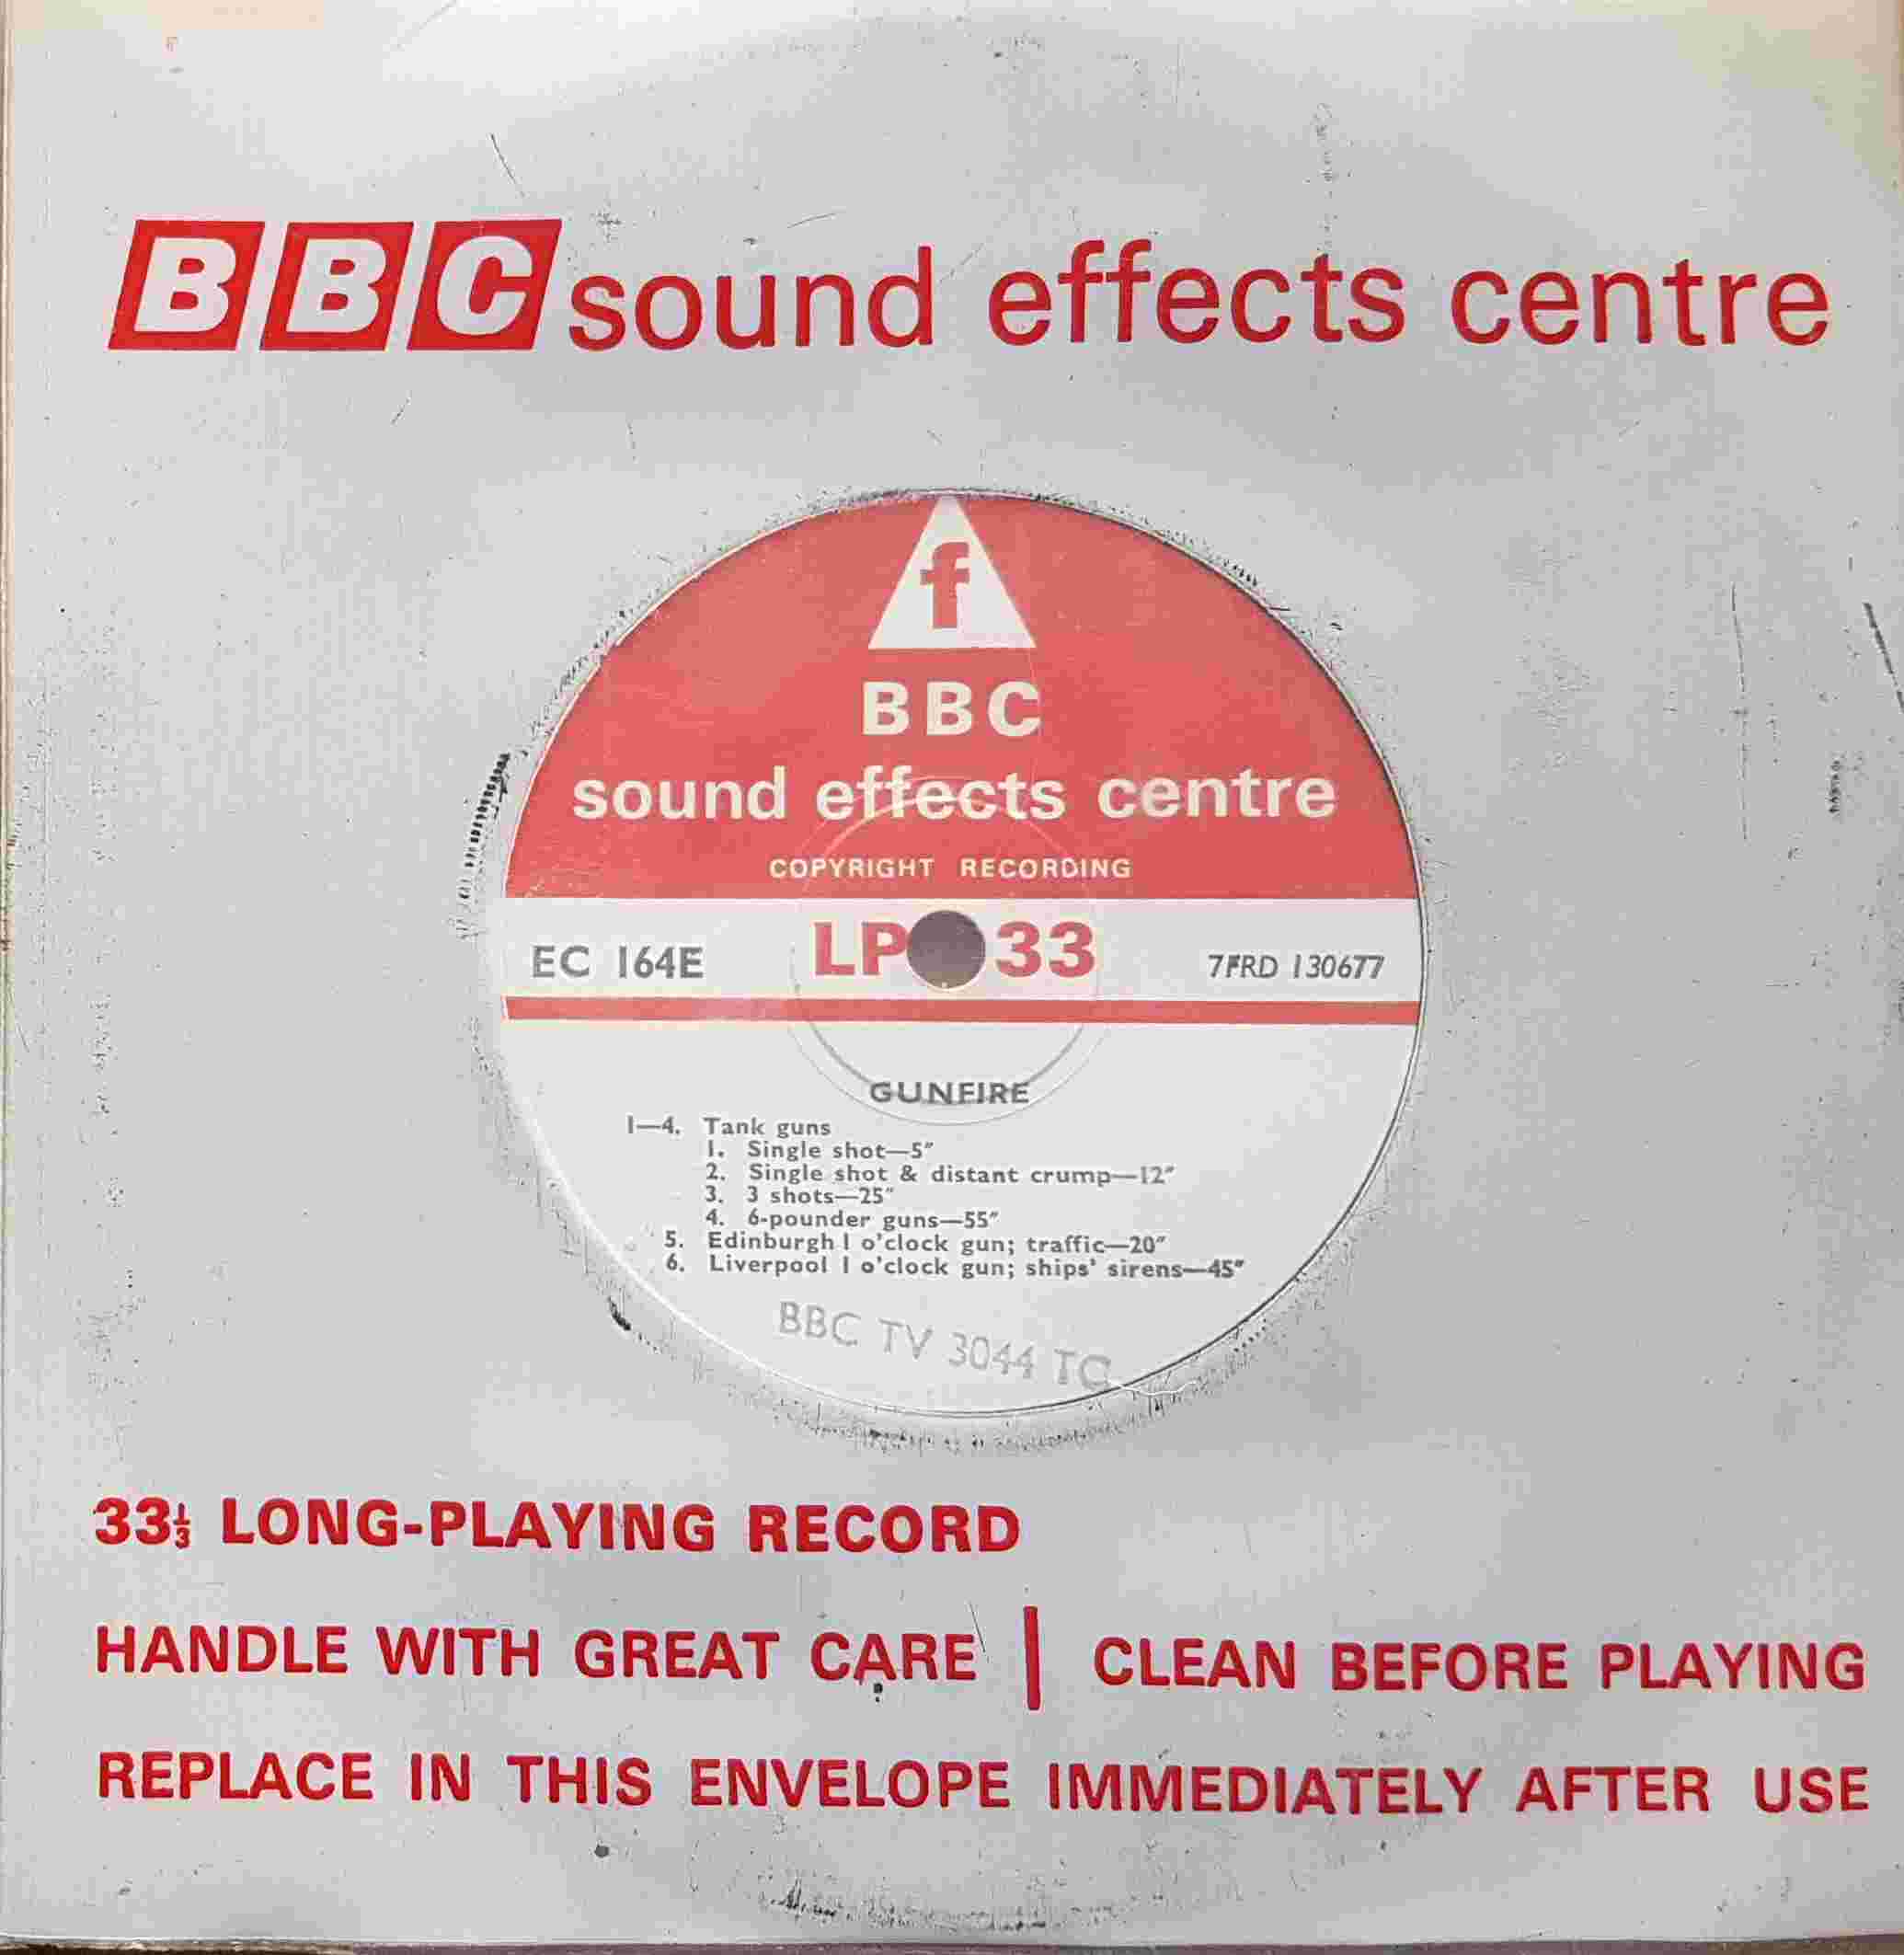 Picture of EC 164E Gunfire by artist Not registered from the BBC records and Tapes library